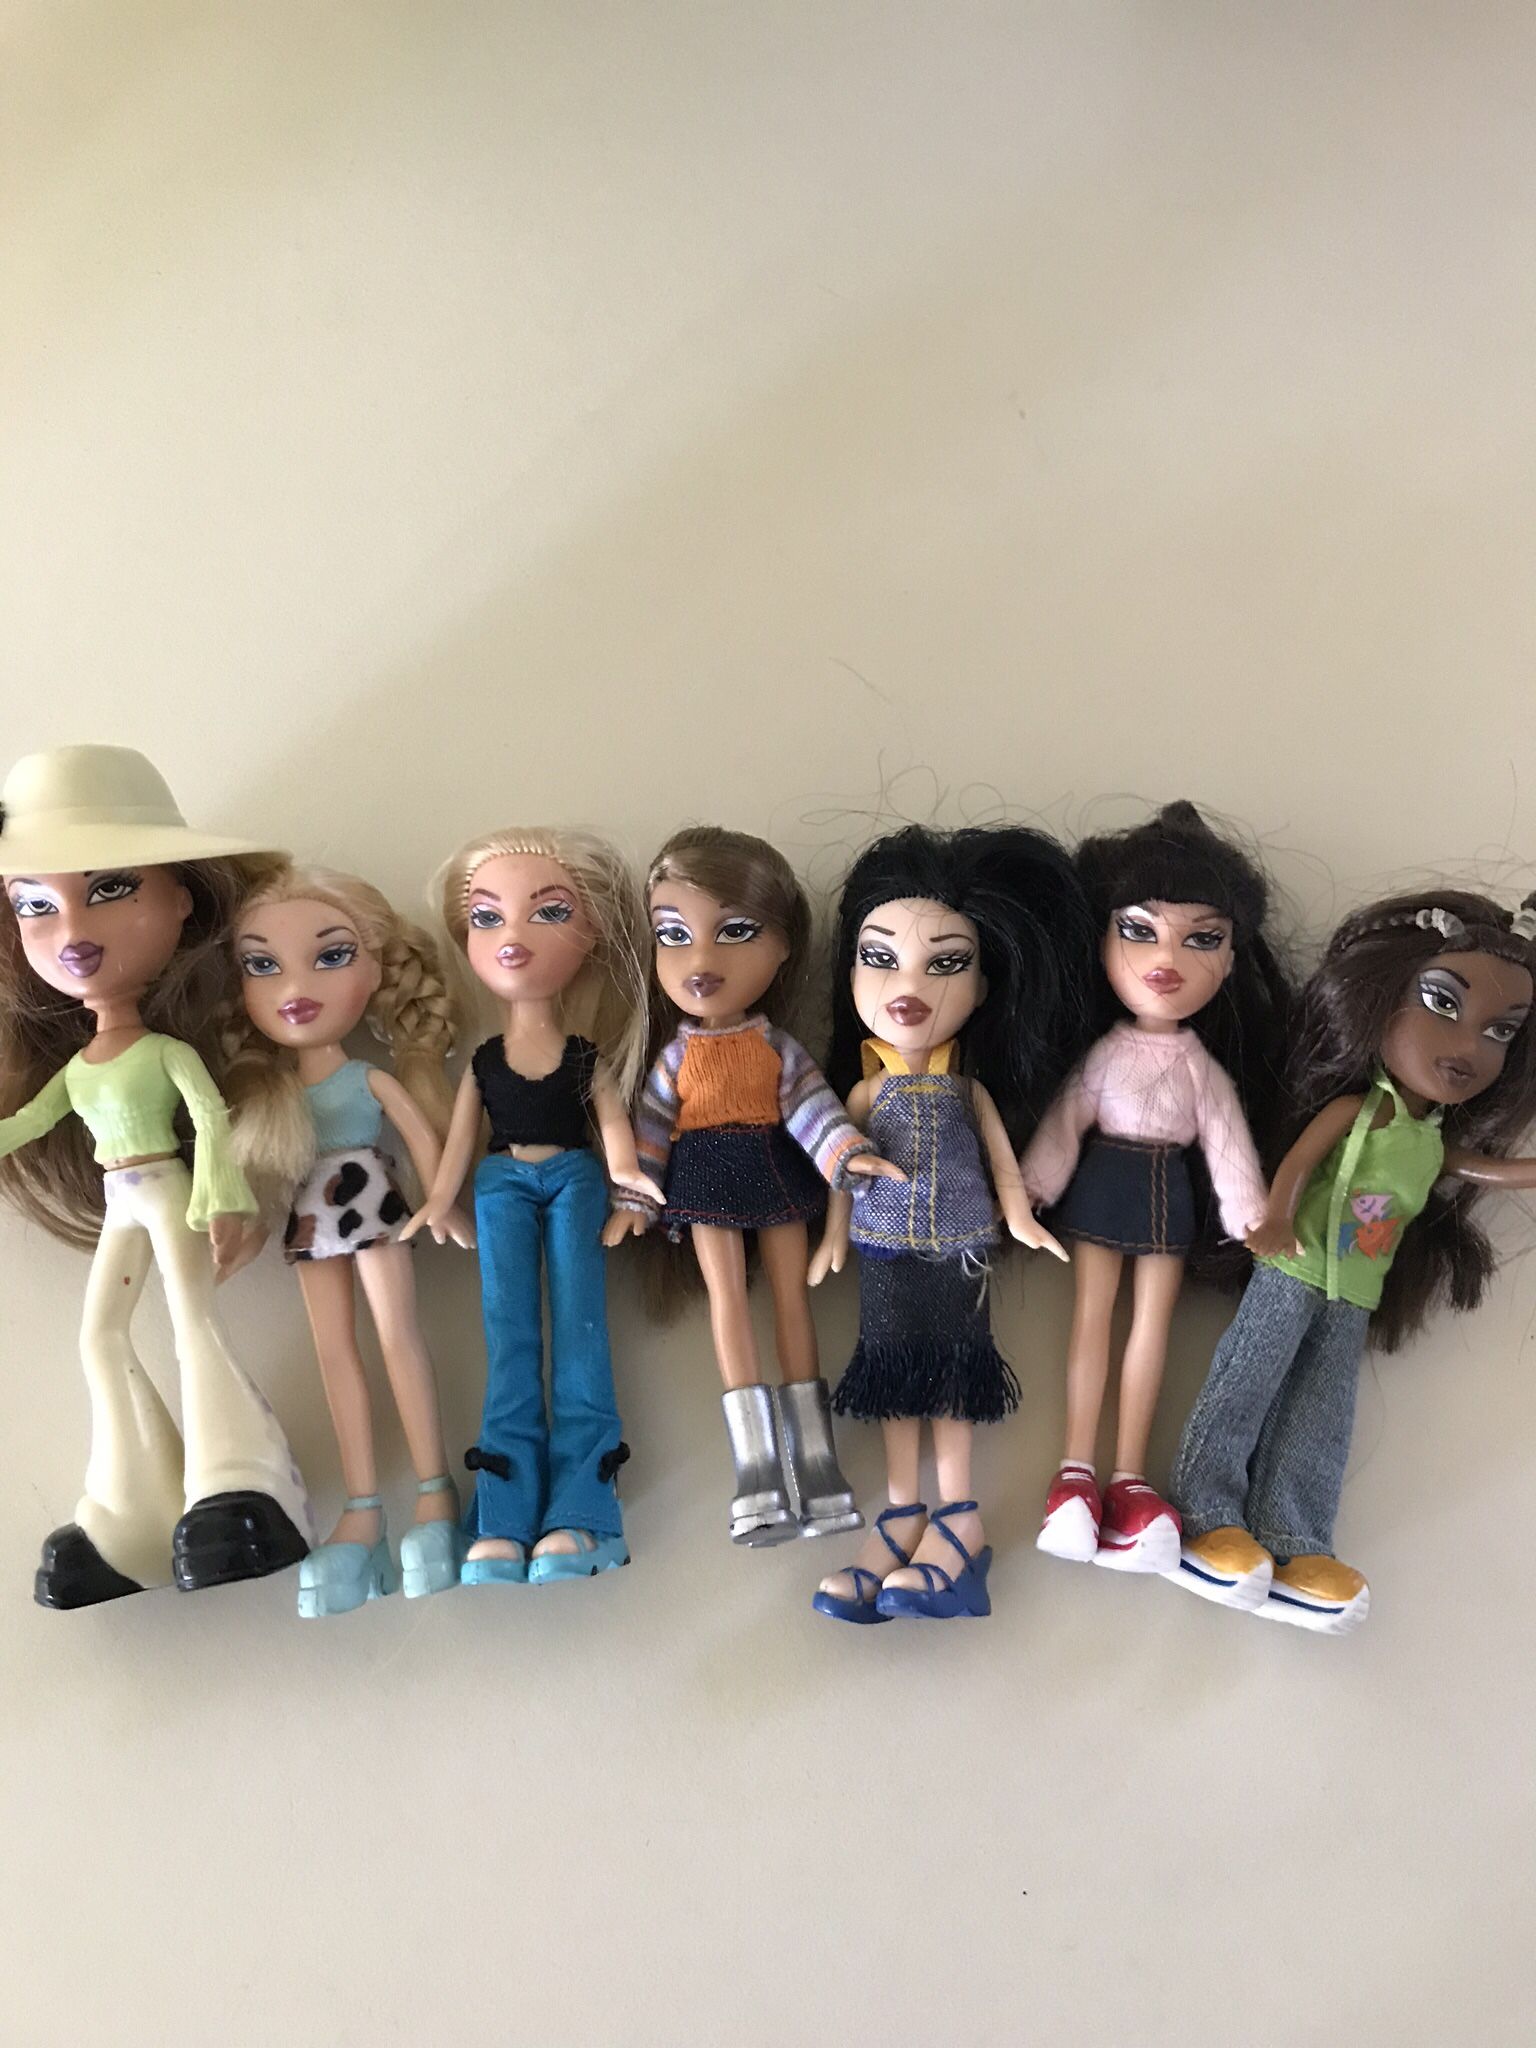 LI’L BRATZ TOY DOLL COLLECTION WITH MATCHING LOFT DOLL HOUSE